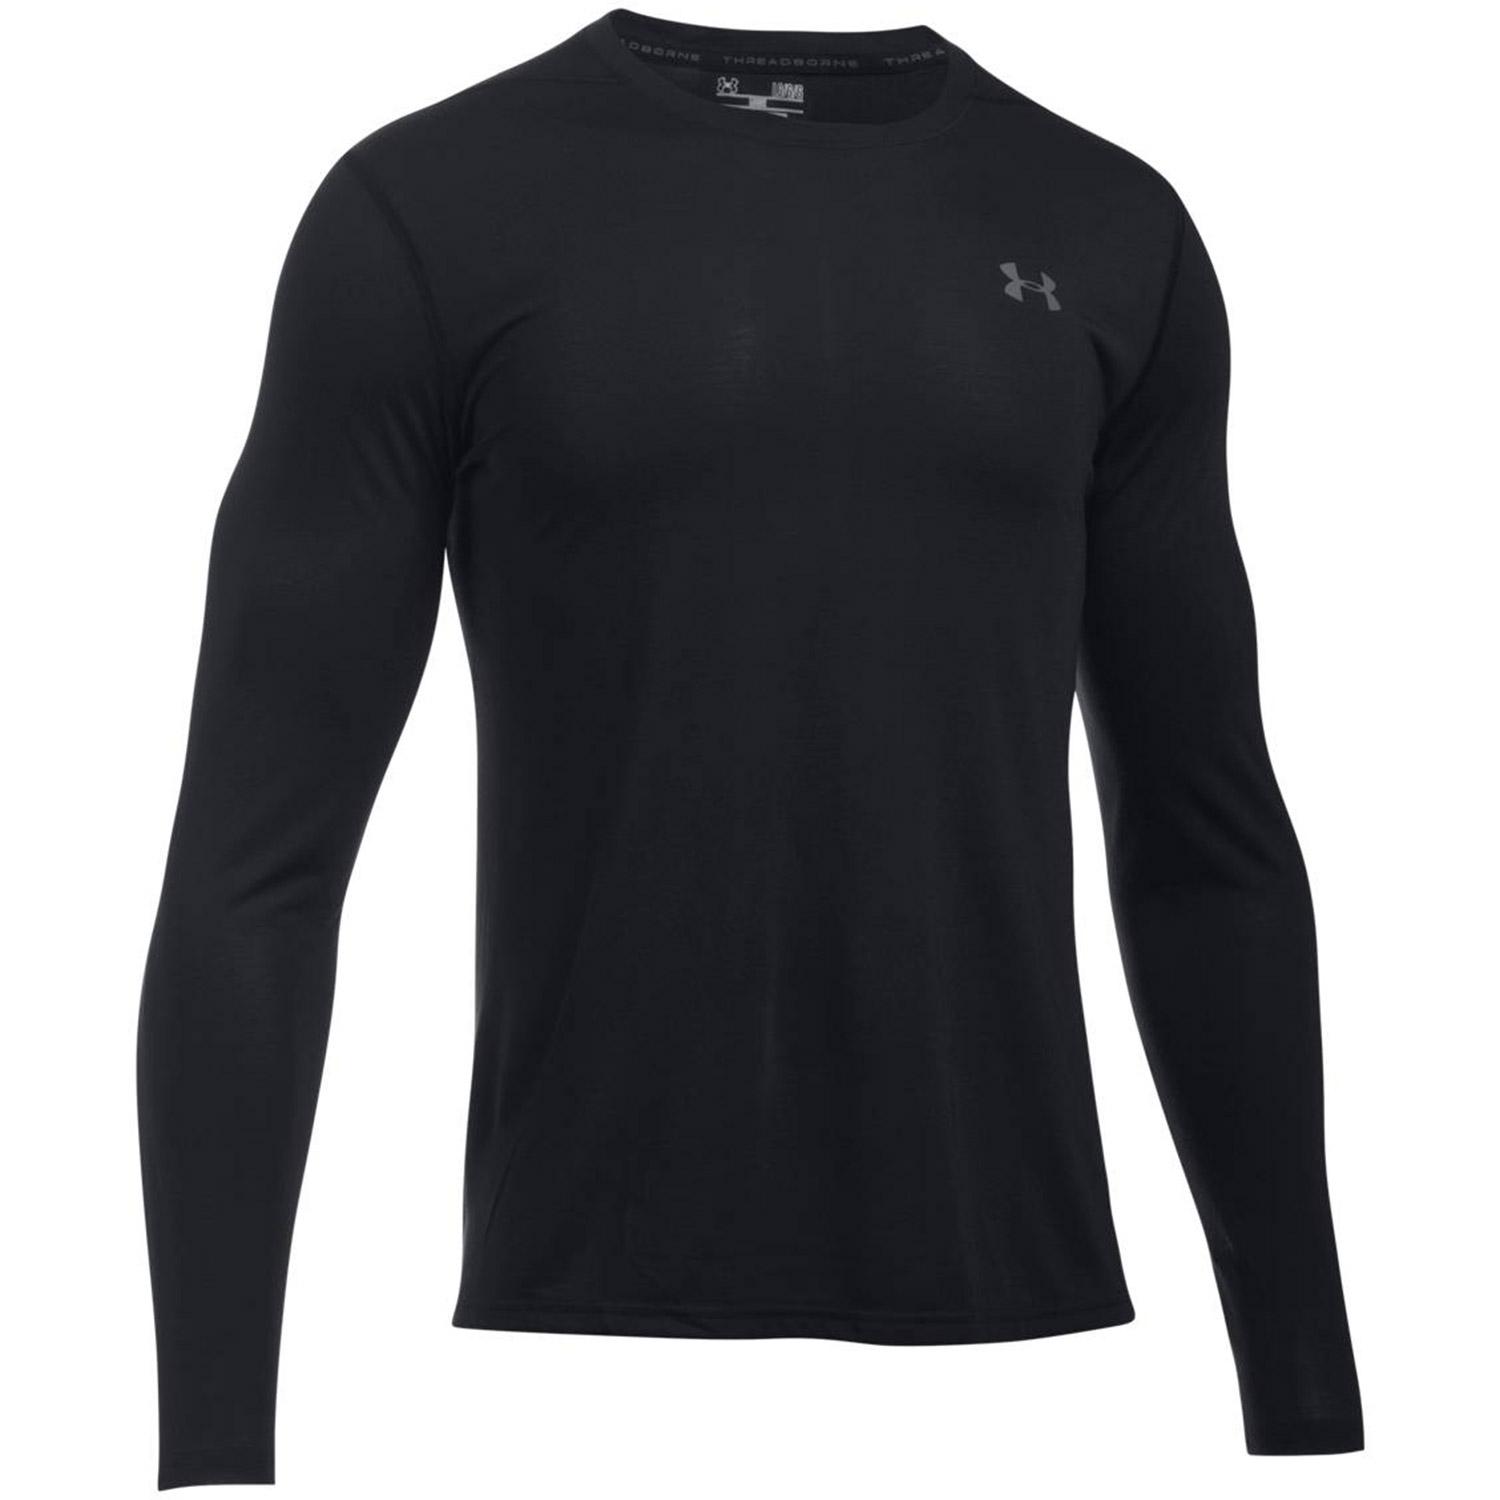 Under Armour Mens Fitted Long Sleeve Top - Black - Tennisnuts.com